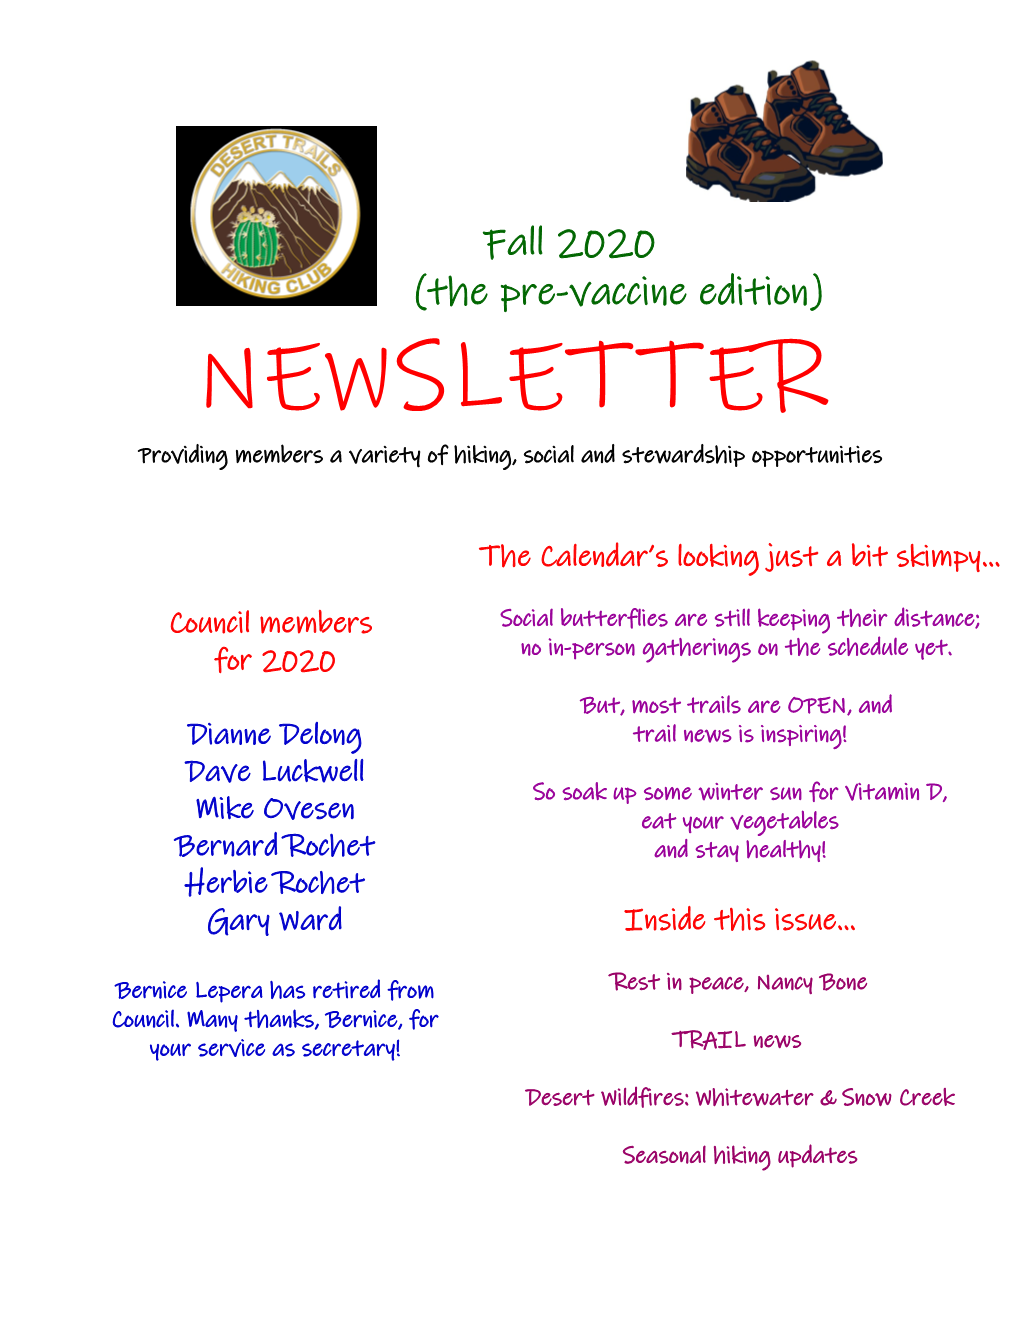 NEWSLETTER Providing Members a Variety of Hiking, Social and Stewardship Opportunities